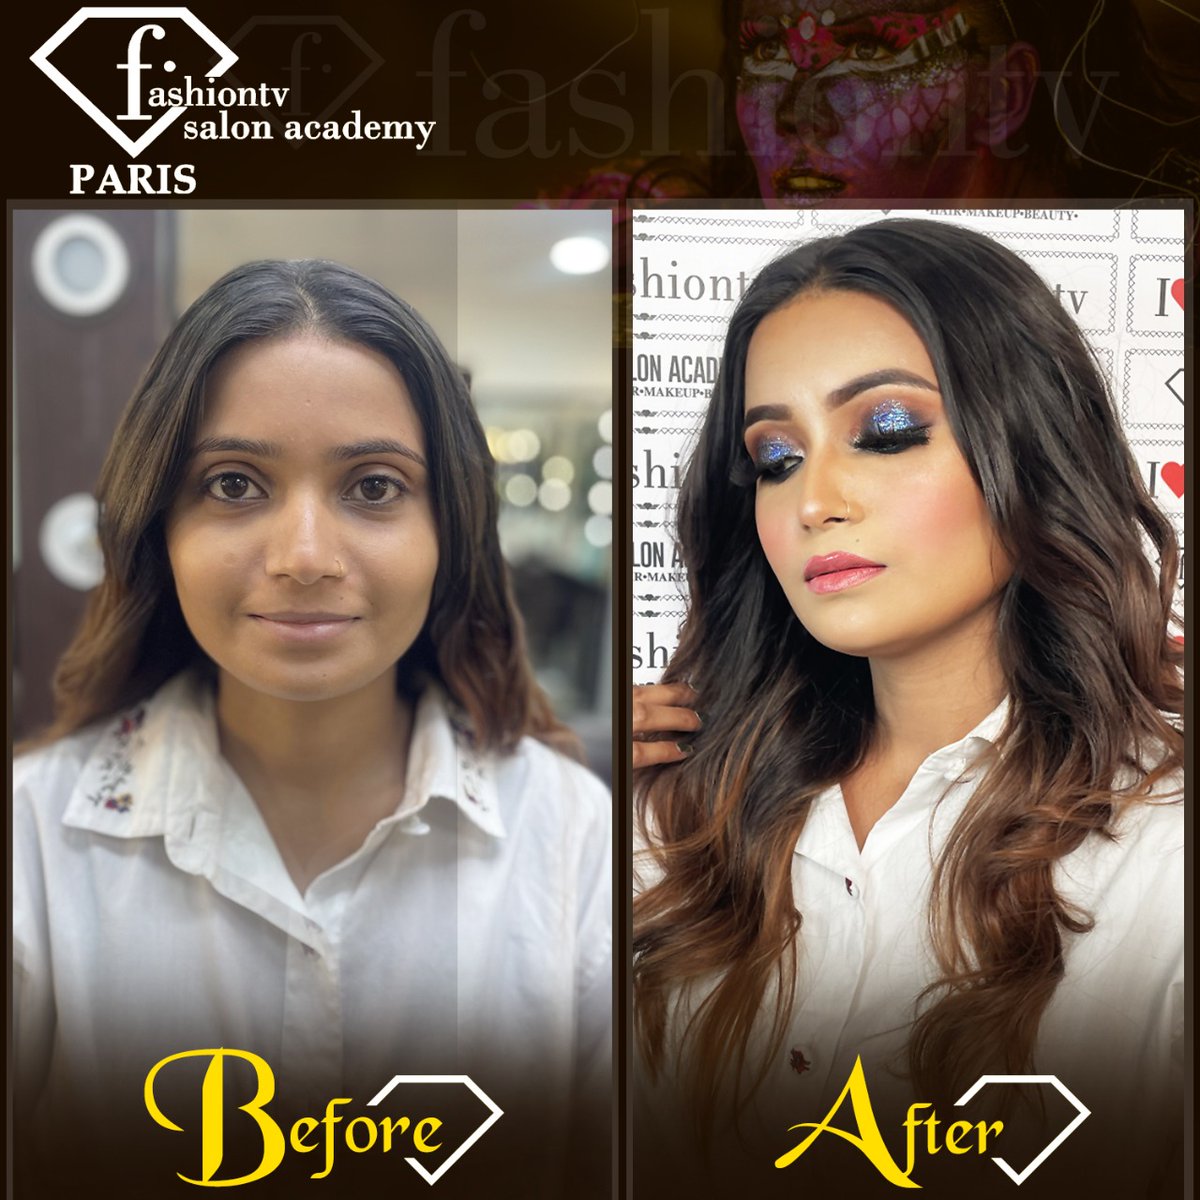 Our Student Work 
#glittereyeshadow #glittereyemakeup  #glittereyemakeup #eyemakeupoftheday  #eyemakeupgoals #eyemakeupremover #eyemakeuptutorials #eyemakeupvideo #Before_and_After #beforeandafter
#makeupartistinlagos #makeupartistindia #makeupartist #makeupartistworld